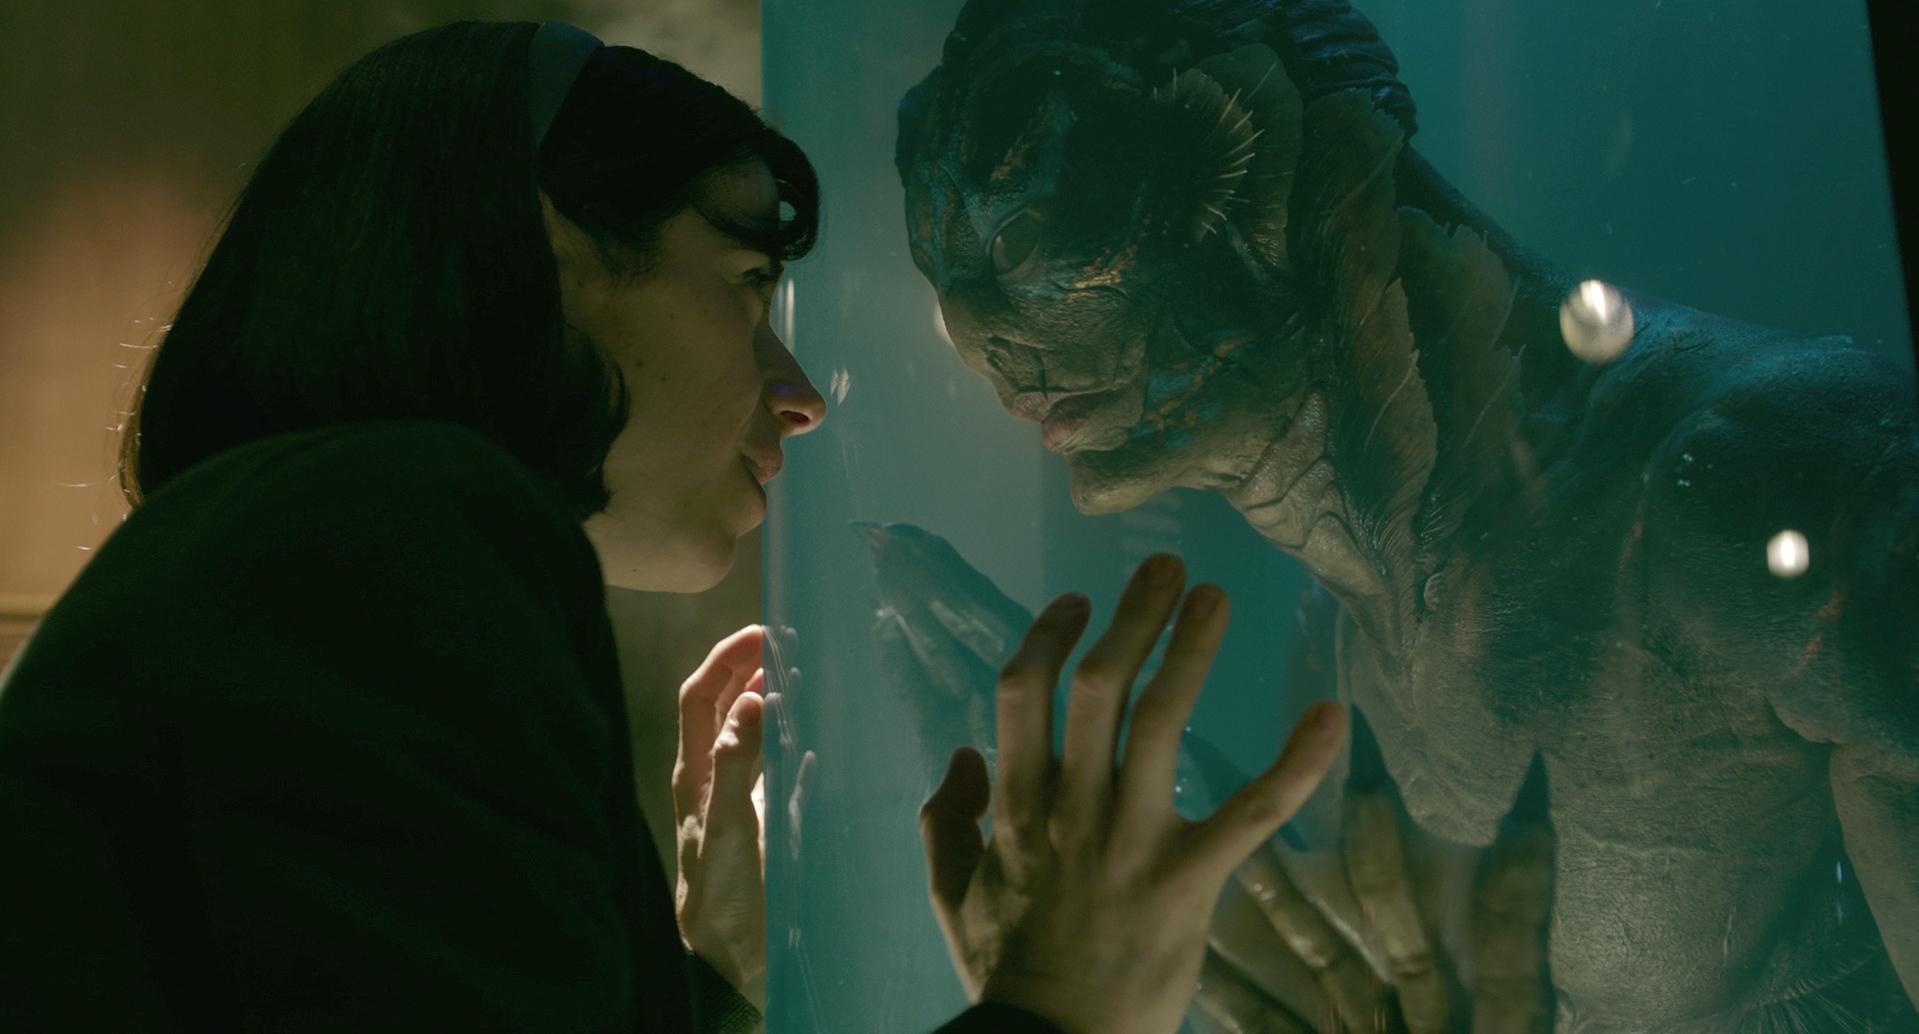 From “The Shape of Water”